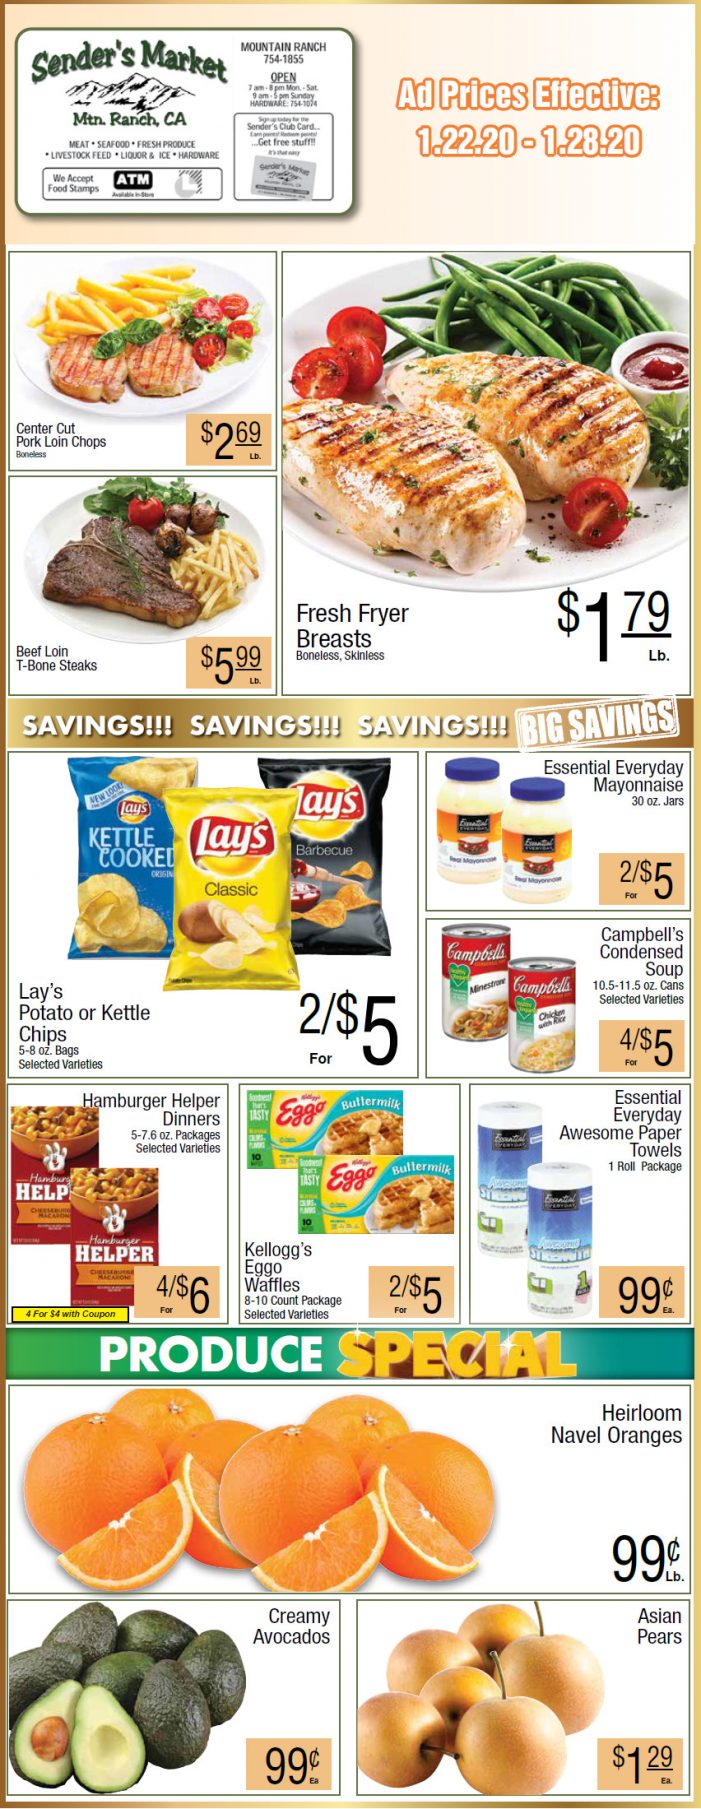 Sender’s Market’s Grocery Ad & Grocery Specials Through January 28th